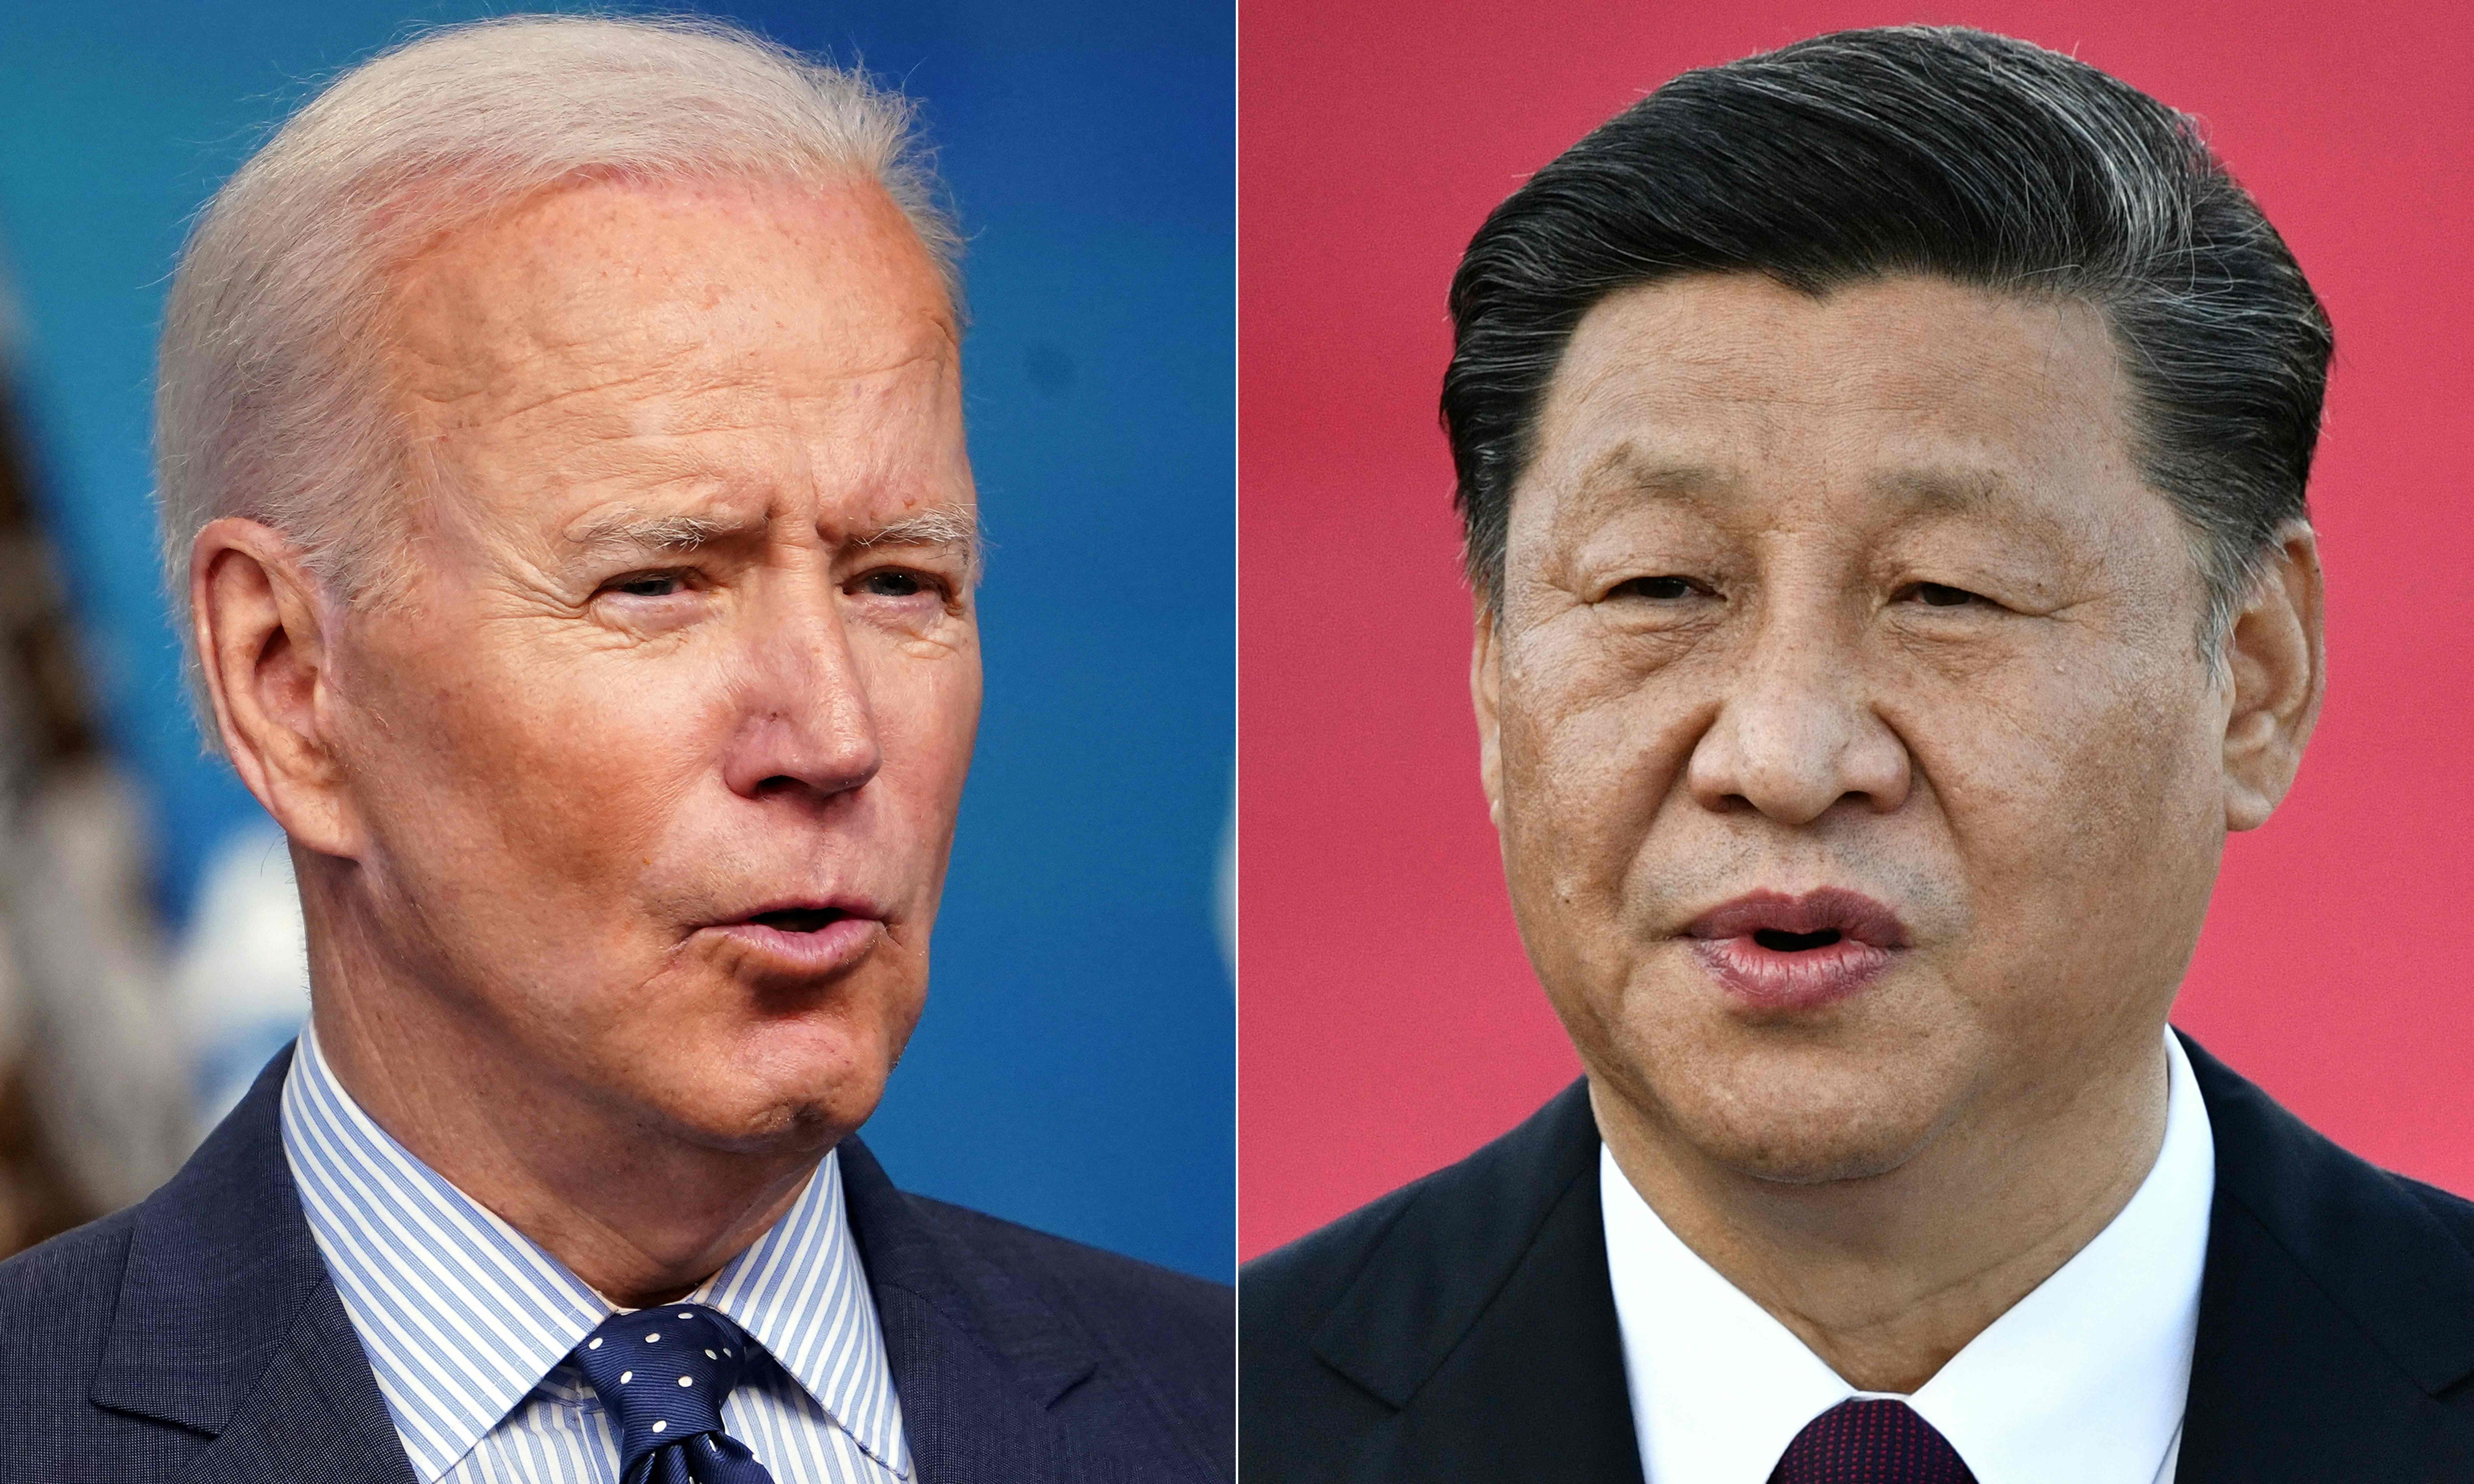 US President Joe Biden and China’s Xi Jinping will host a virtual summit on Monday, according to the White House. Photo: AFP